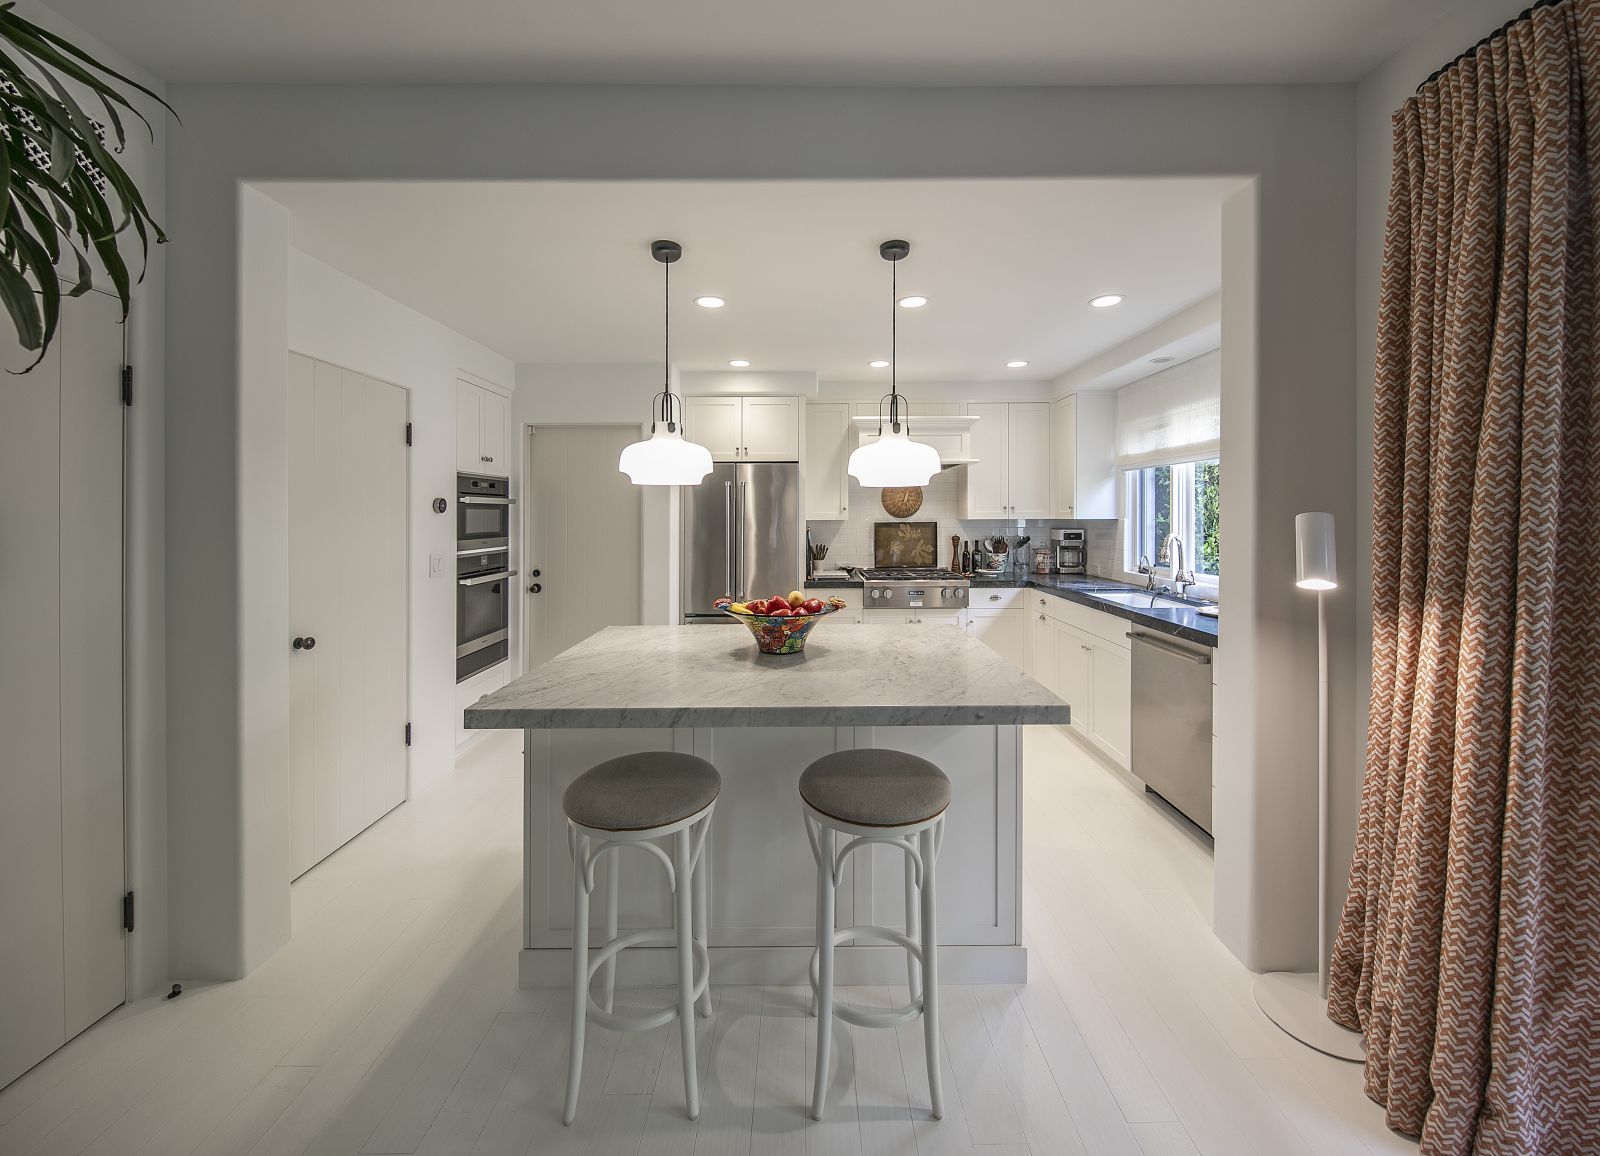 Quiet luxury, exemplified in a high-end kitchen that incorporates a mix of natural and warm ambient lighting.